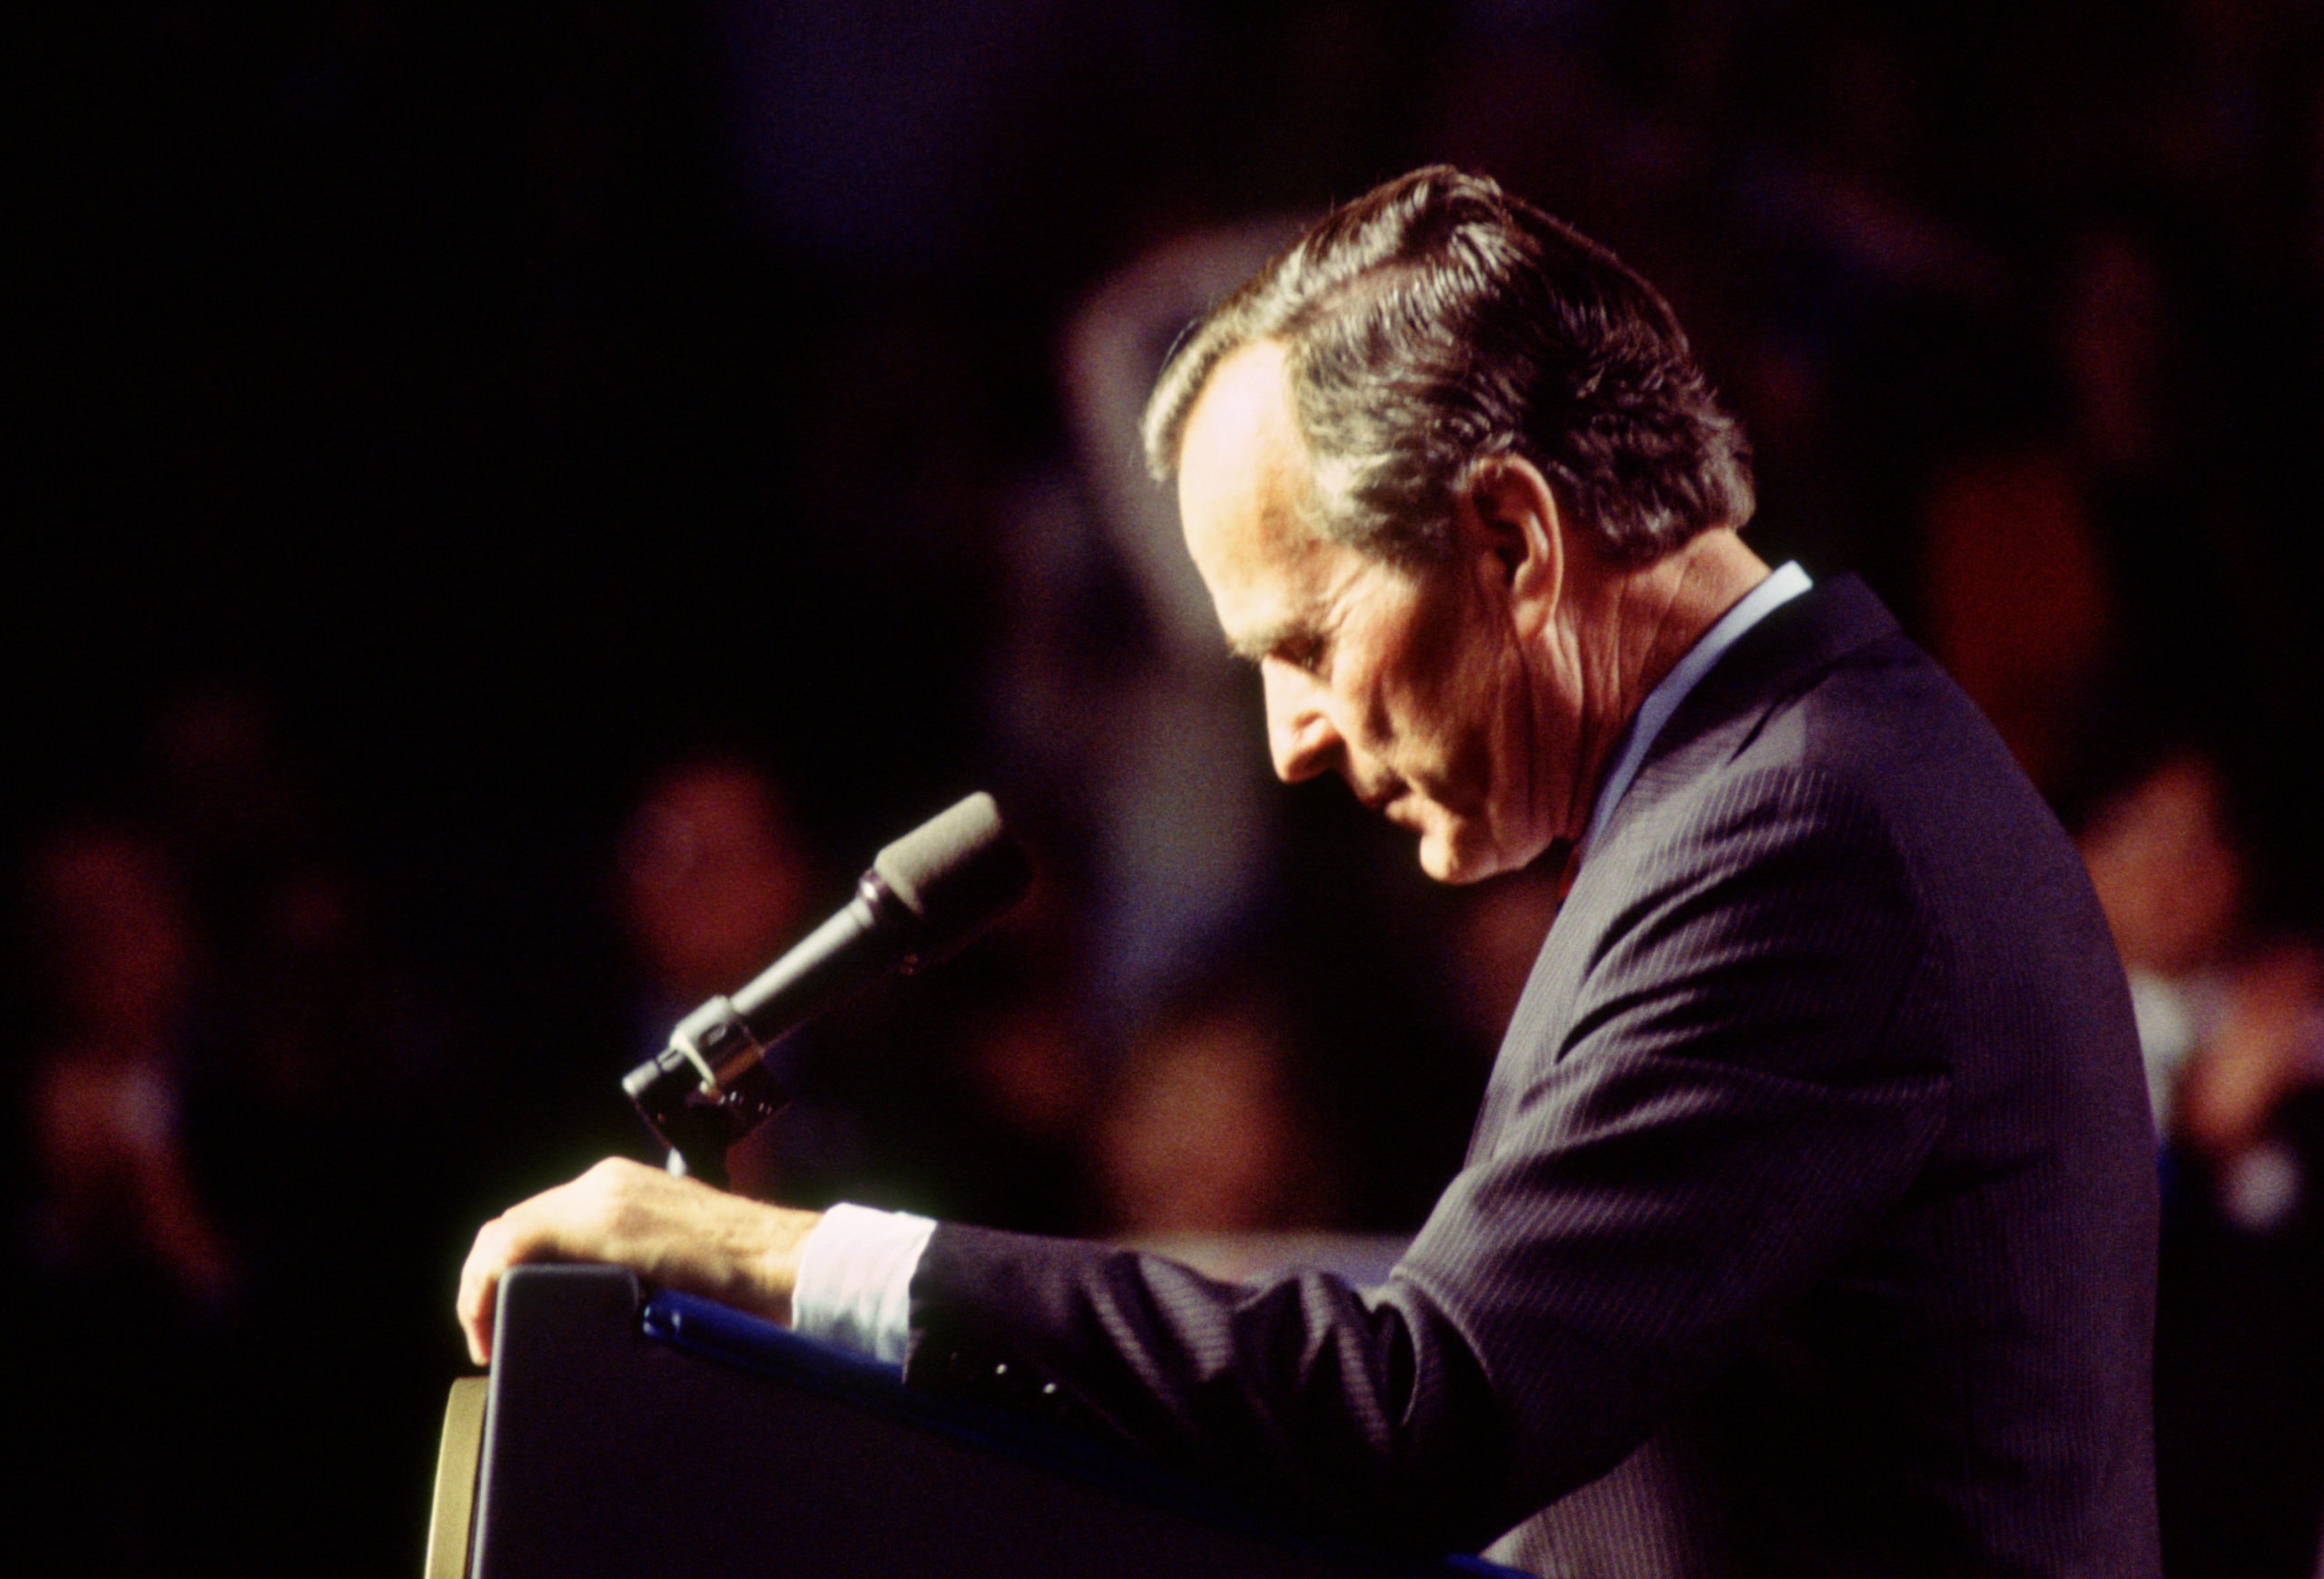 President George Bush delivers his concession speech on election night November 3, 1992 in Houston, Texas. The President addressed his supporters after election returns indicated that Arkansas Governor Bill Clinton had won the race.